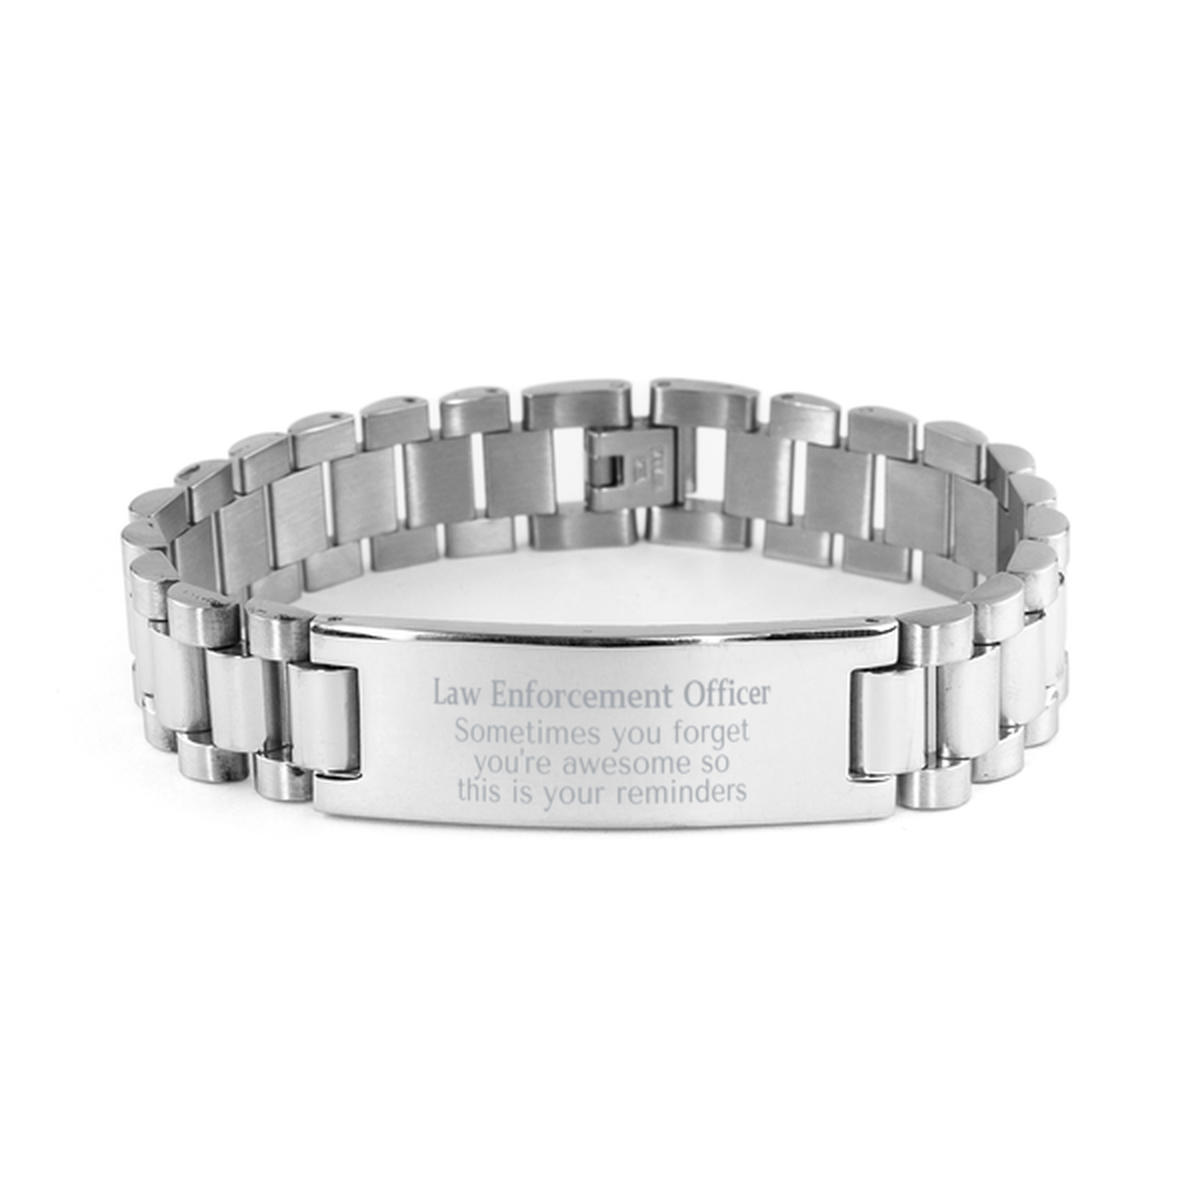 Sentimental Law Enforcement Officer Ladder Stainless Steel Bracelet, Law Enforcement Officer Sometimes you forget you're awesome so this is your reminders, Graduation Christmas Birthday Gifts for Law Enforcement Officer, Men, Women, Coworkers